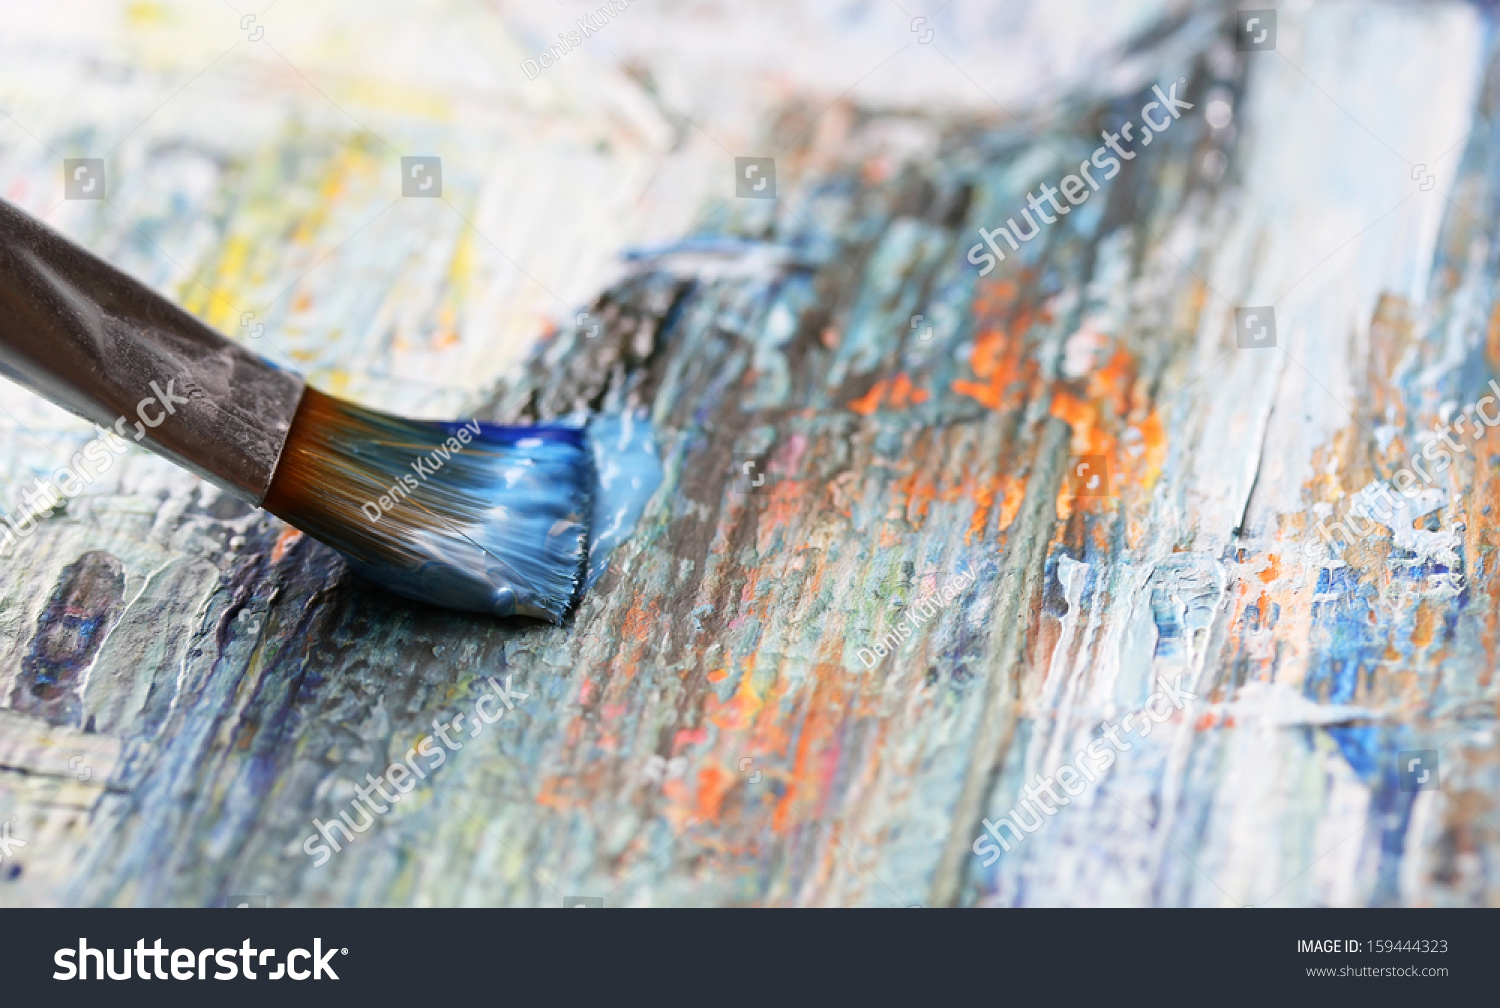 Closeup of brush and palette.  #159444323